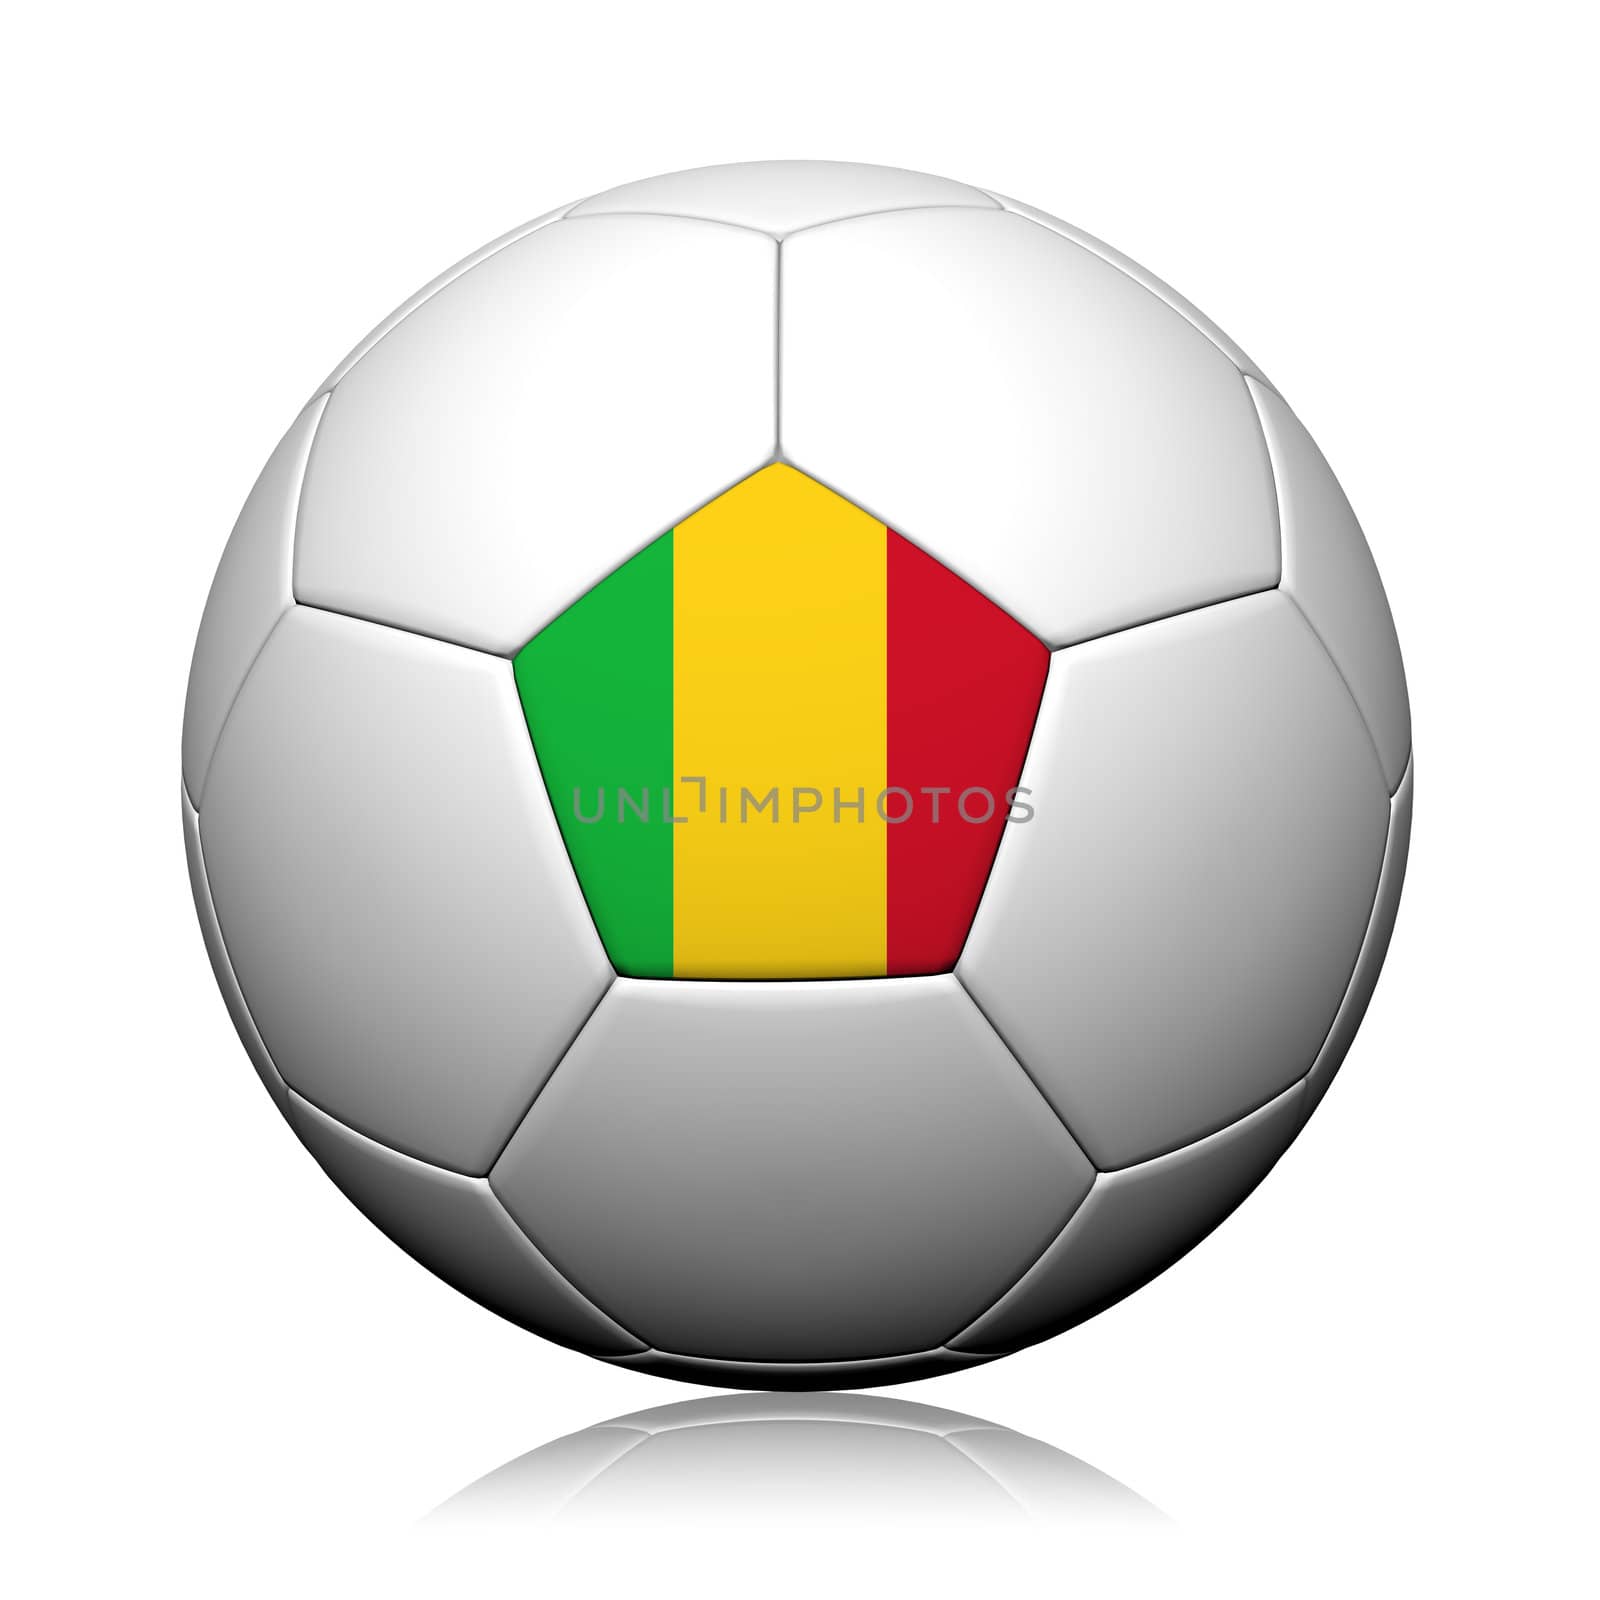 Mali  Flag Pattern 3d rendering of a soccer ball